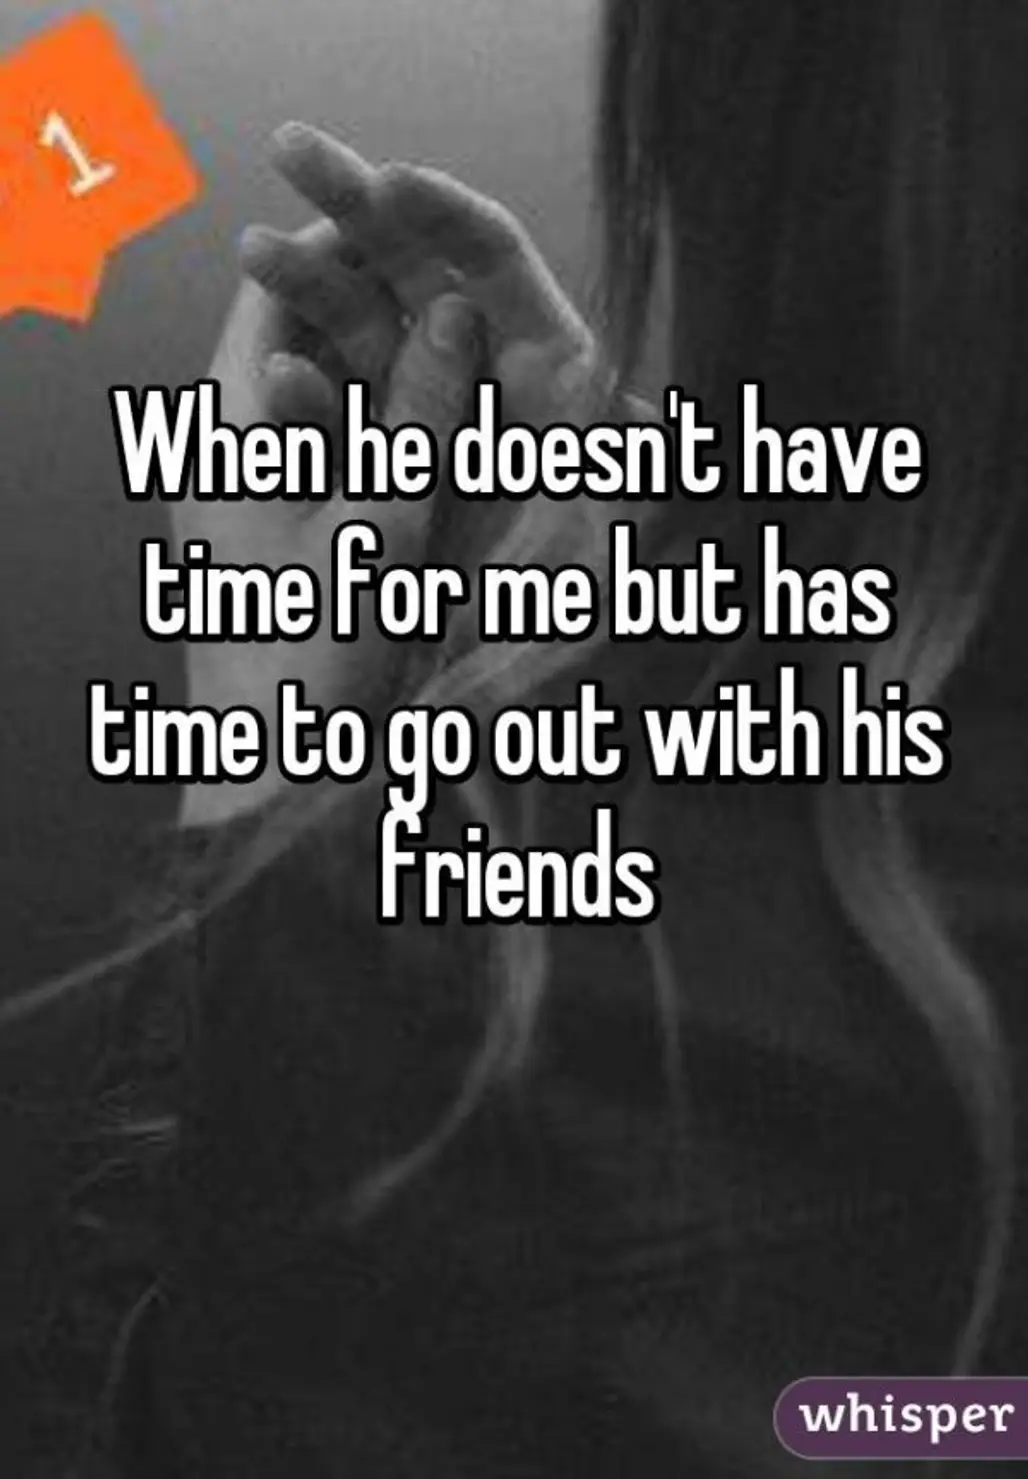 He Doesn't Have Time for You